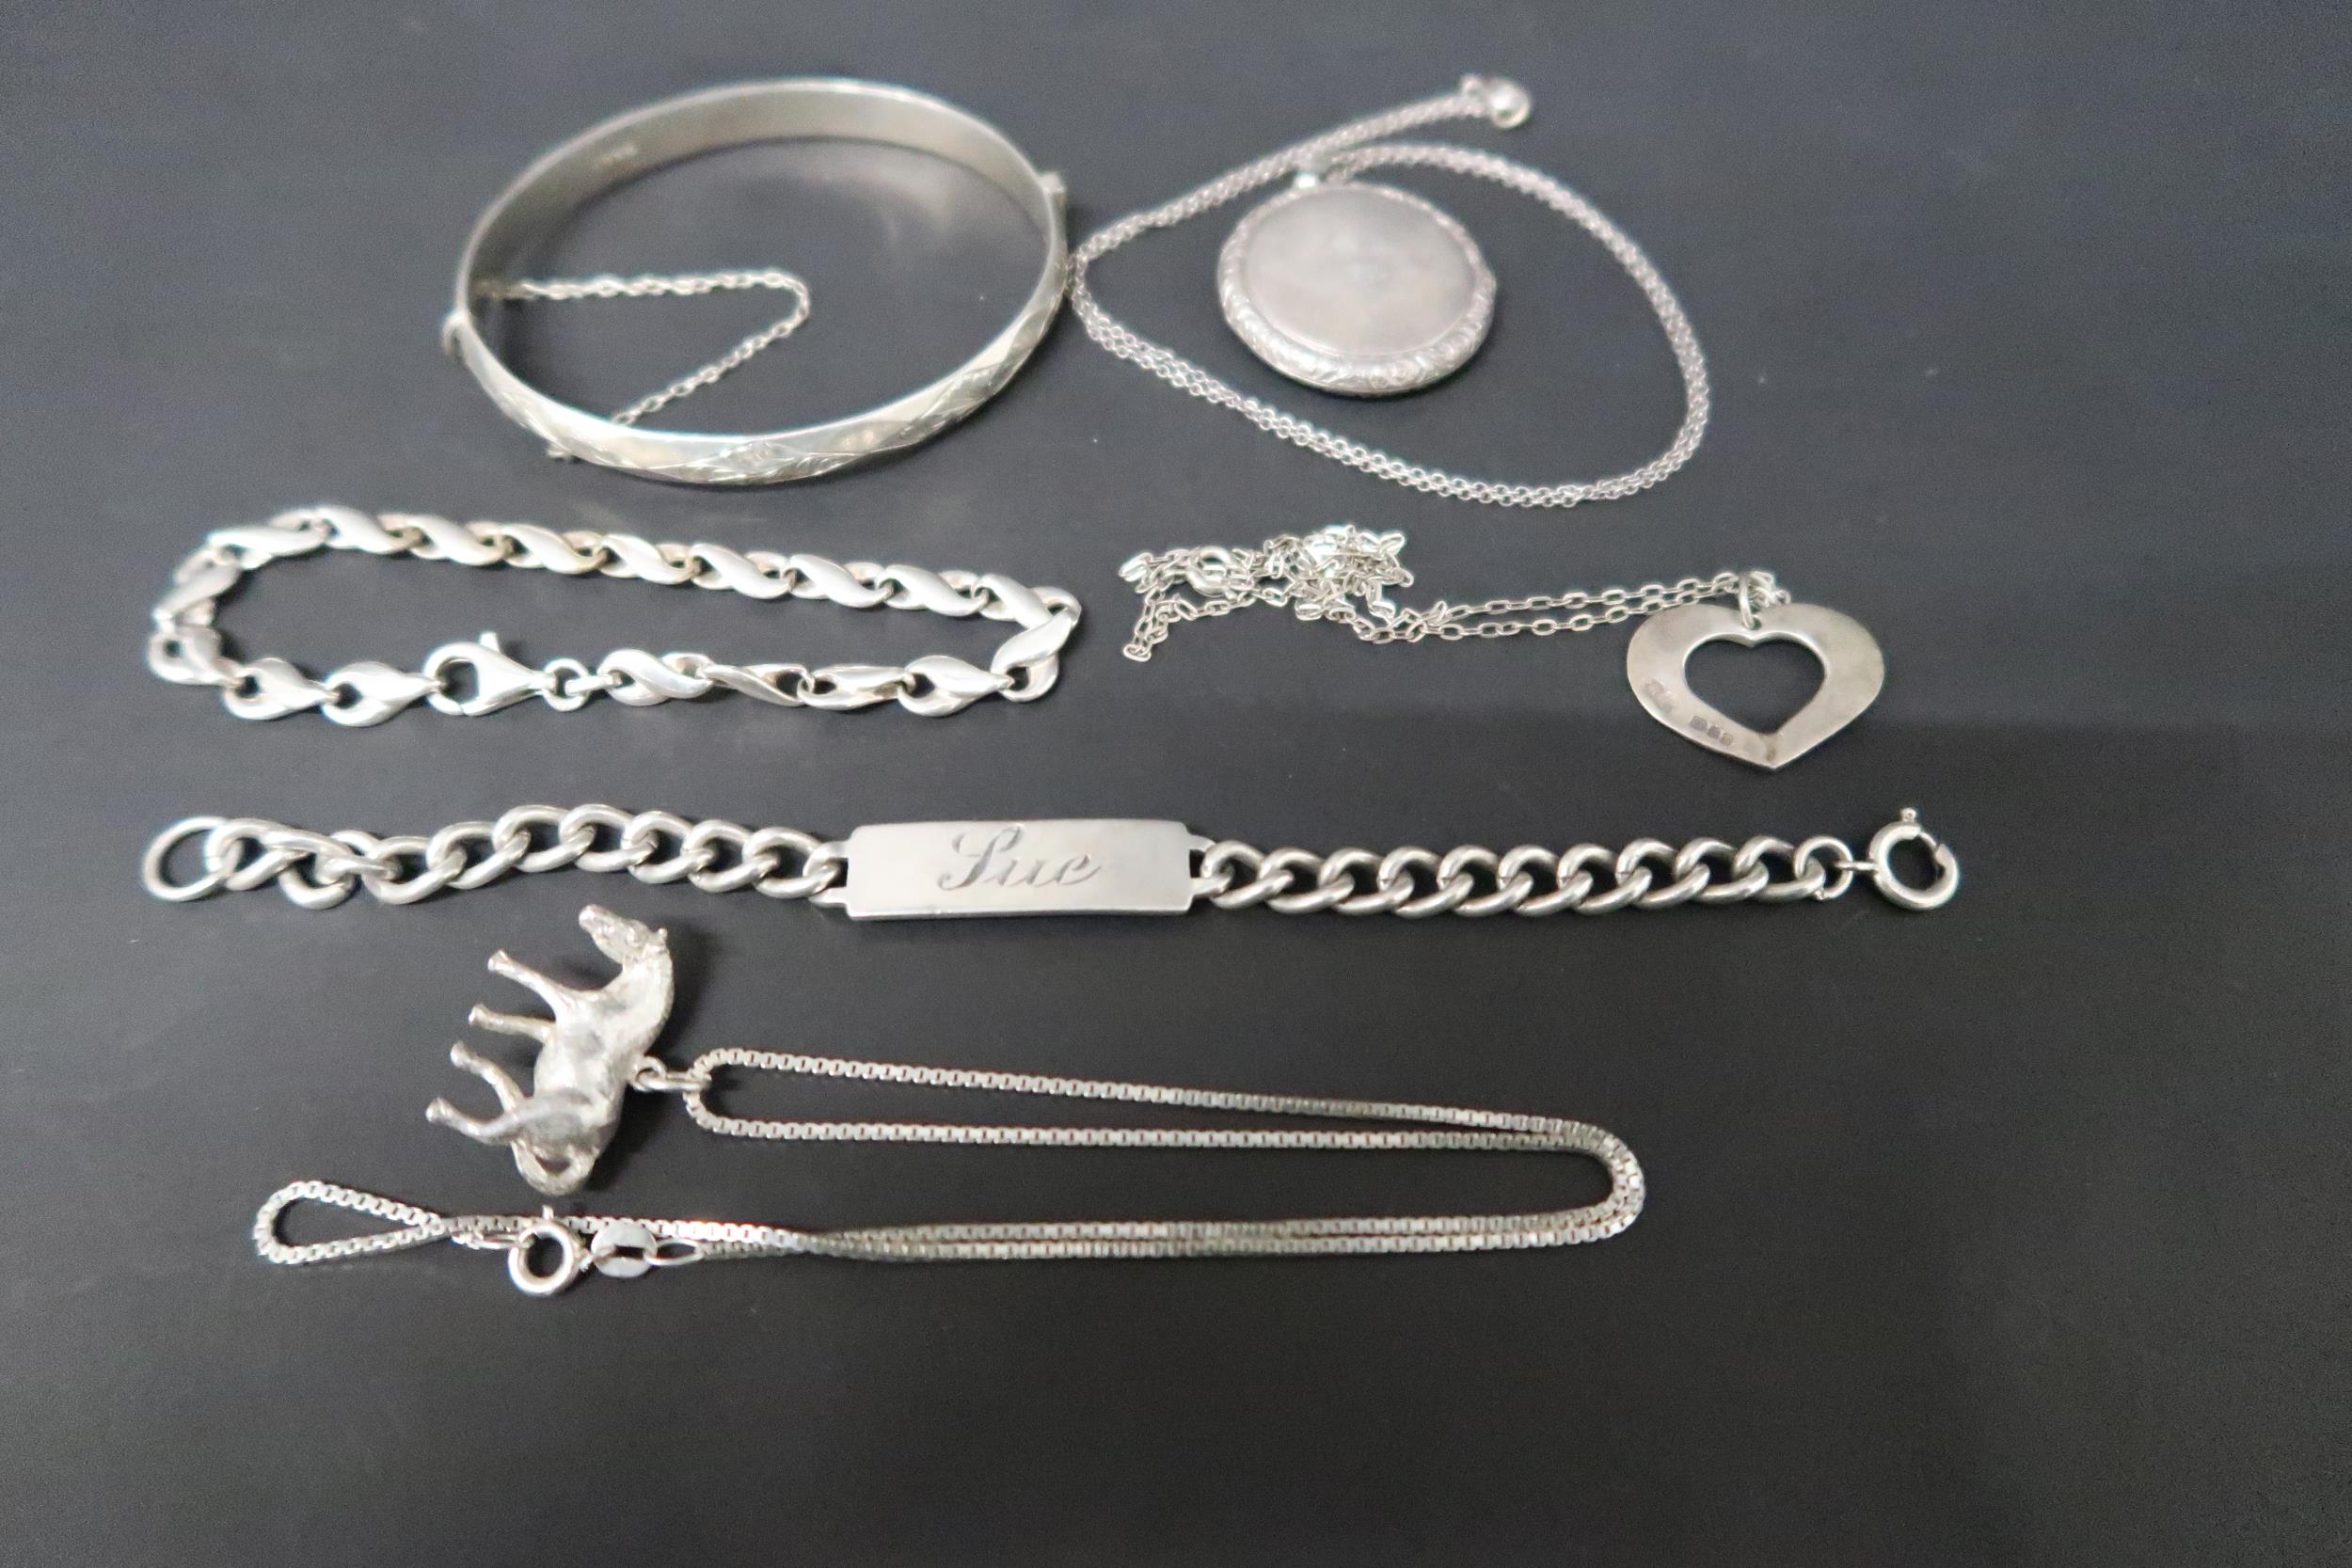 A hallmarked silver circular locket on chain, bracelet, plus two necklaces, one necklace with equine